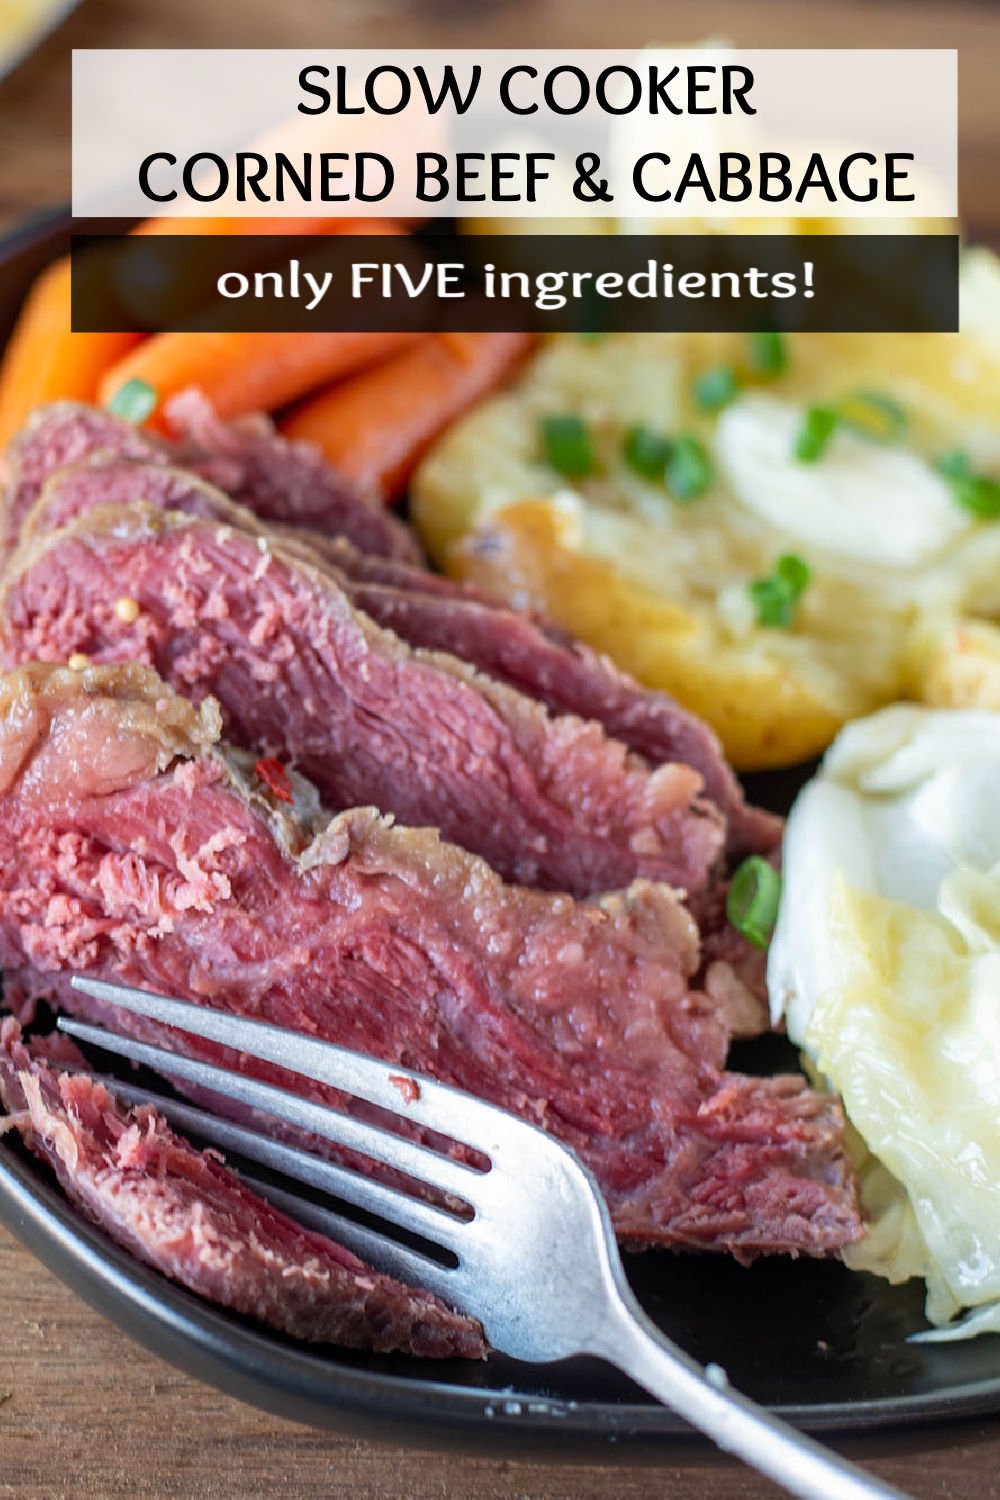 Slow Cooker Corned Beef and Potatoes is the perfect dinner for celebrating Saint Patrick’s Day with a classic recipe. You slow cook corned beef, potatoes, carrots, and cabbage in your crockpot to create a tender and flavorful meal. With only five ingredients, this will be in regular dinner rotation! | www.persnicketyplates.com